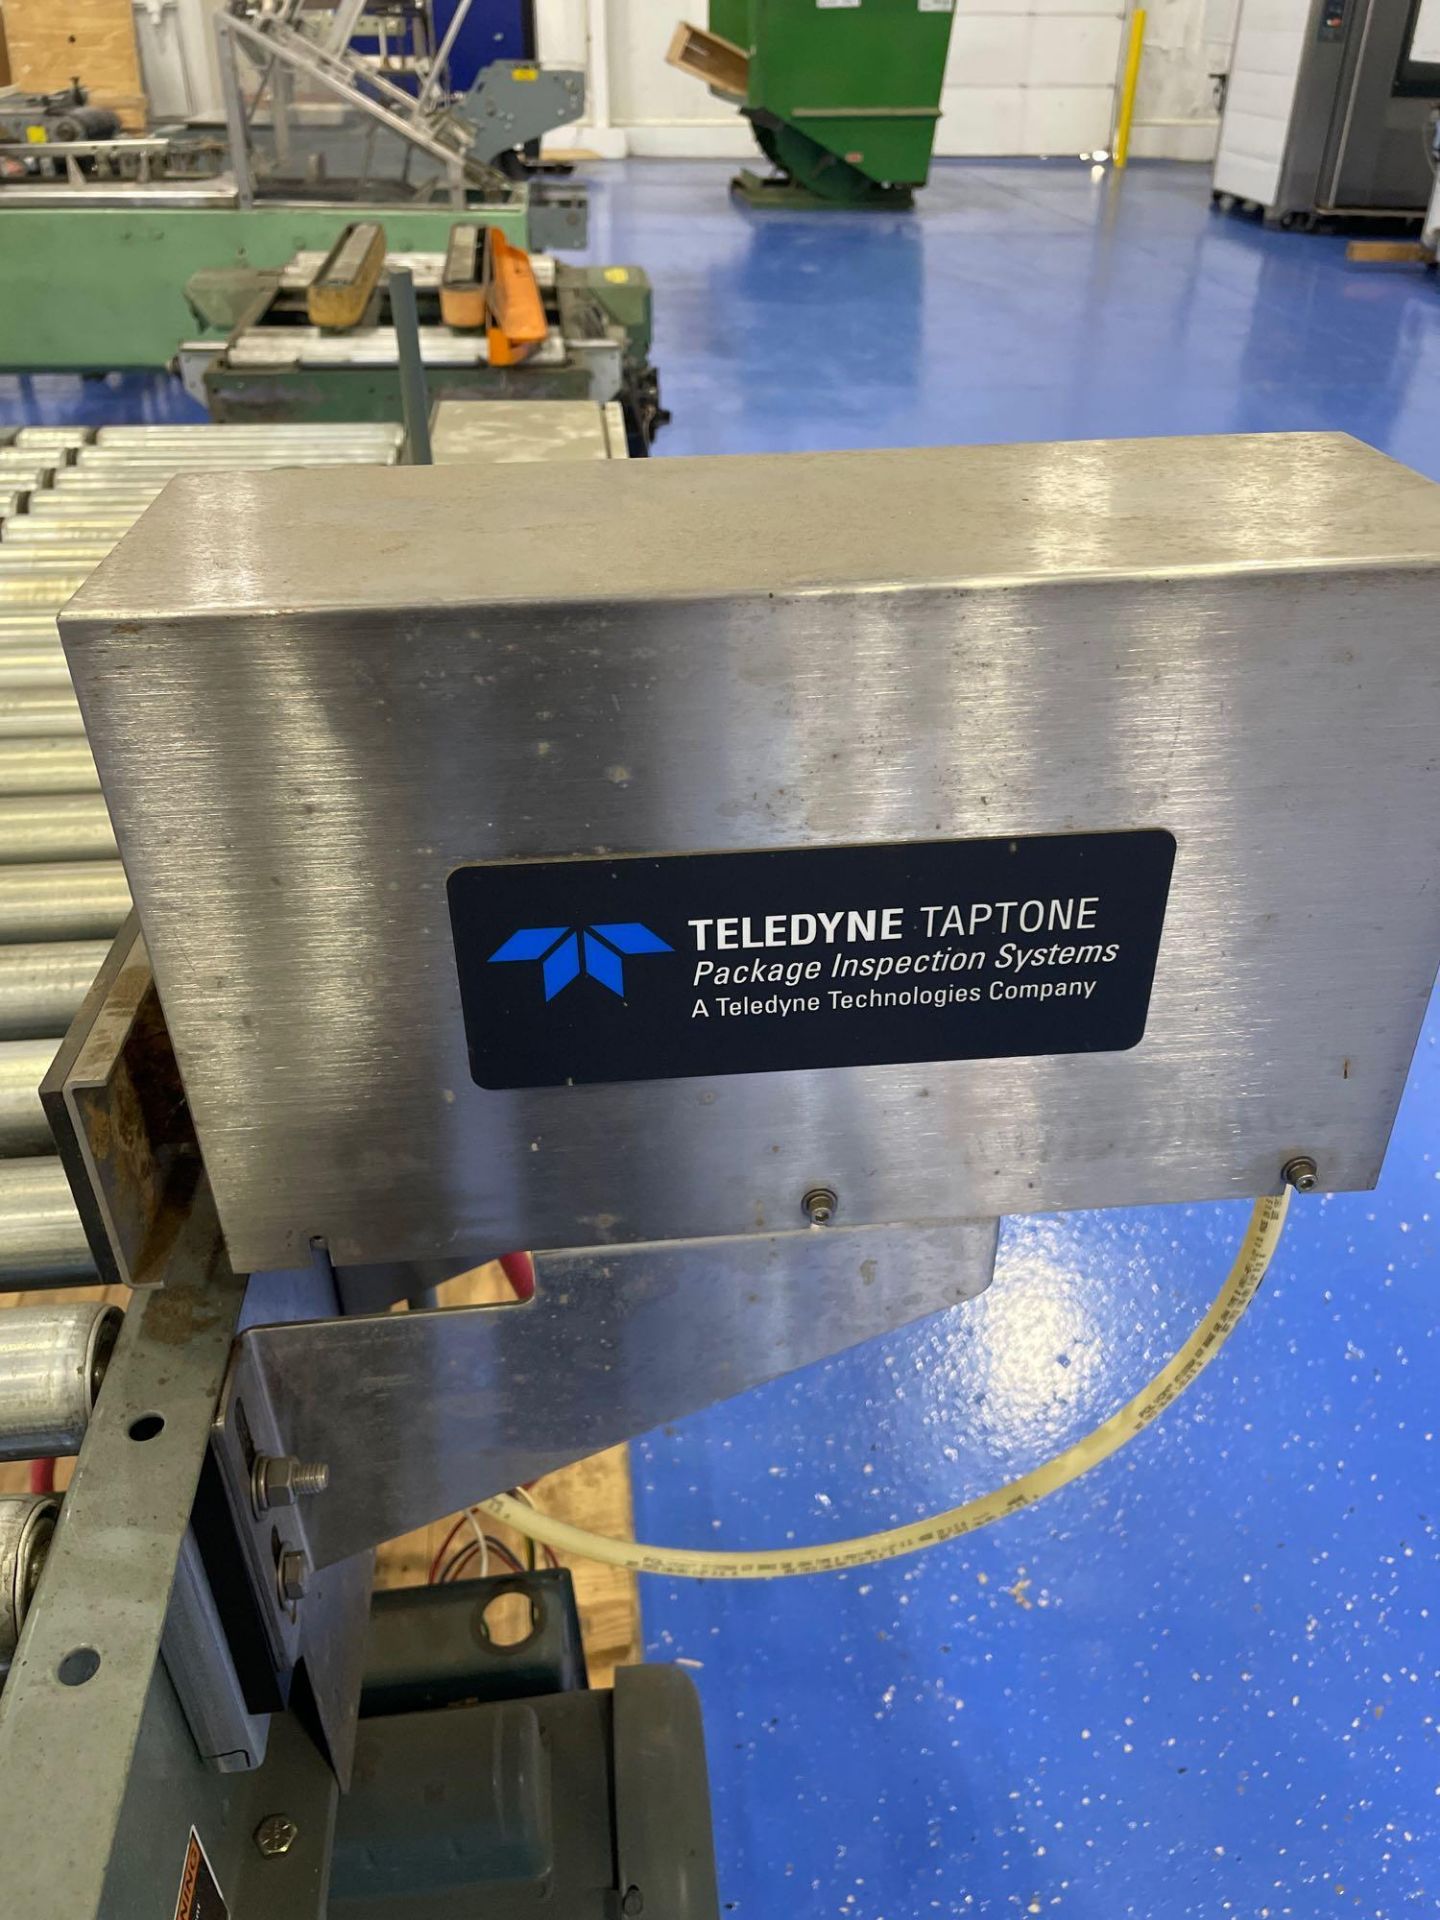 Hytrol Powered Roller Conveyor with Teledyne Taptone Reject System - Image 6 of 13